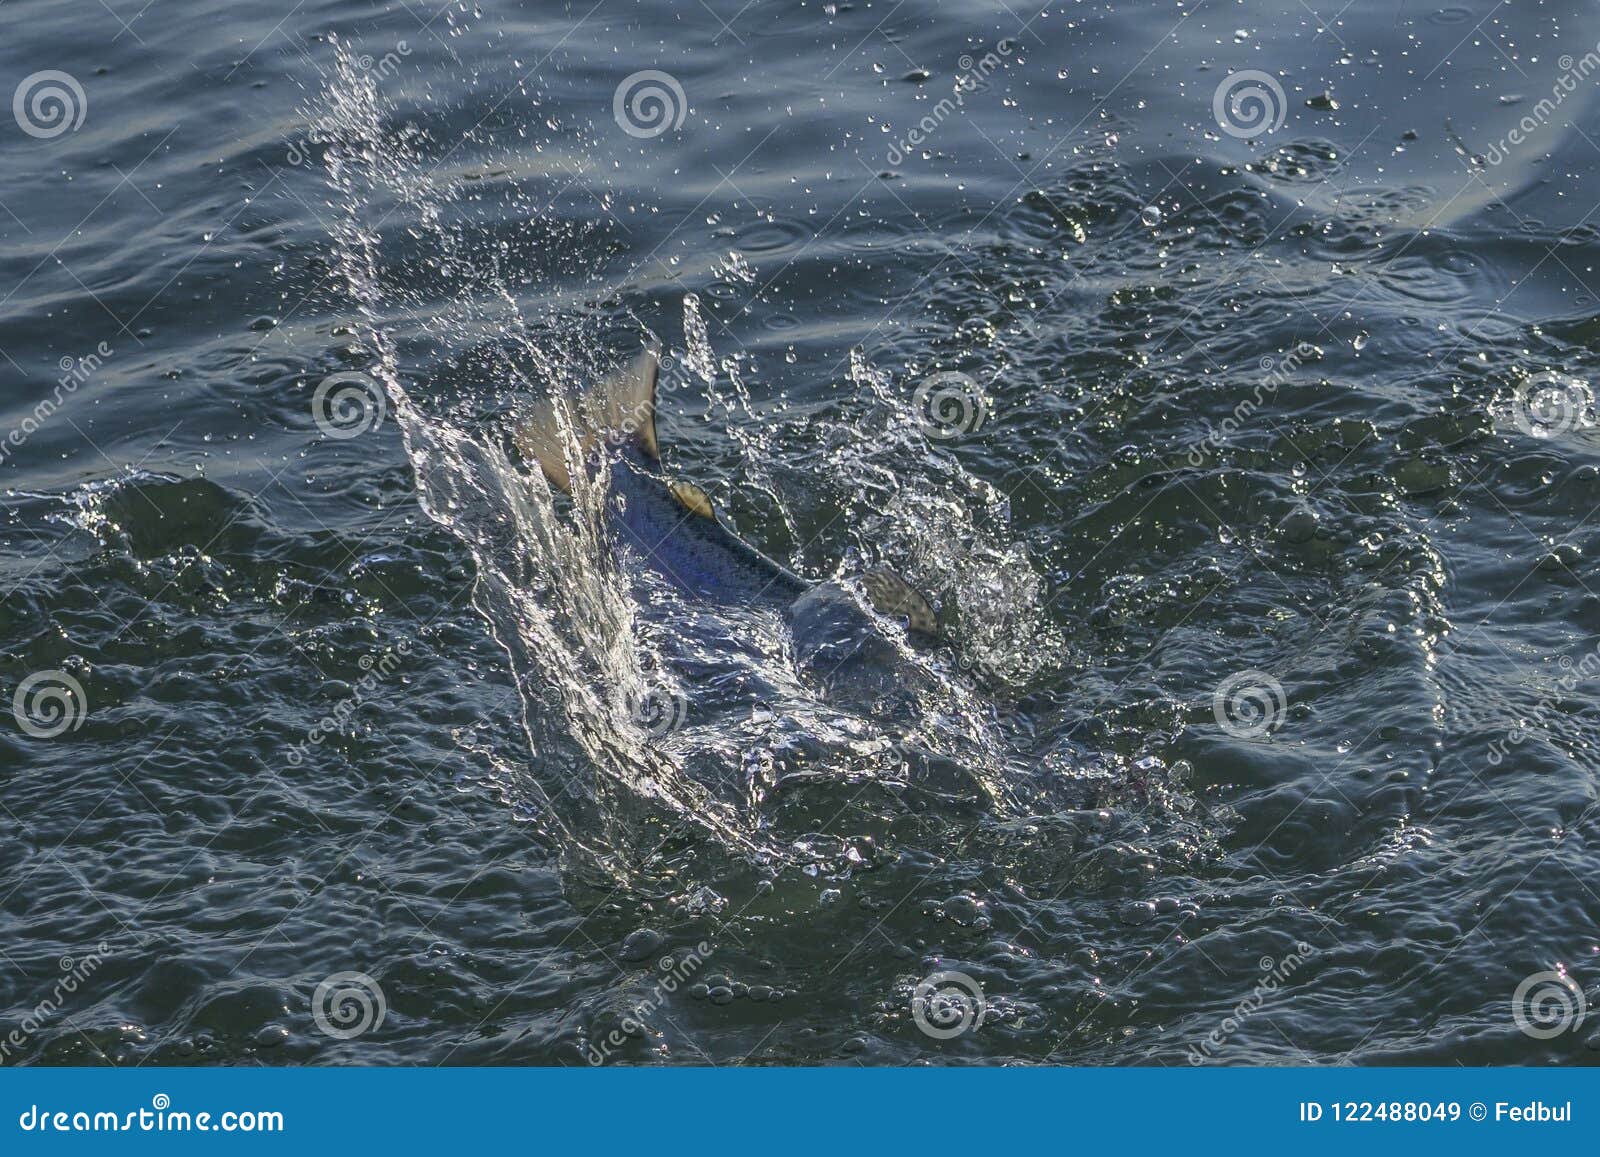 Fishtail with Splashing after Jumping Fish in Water. Area Trout